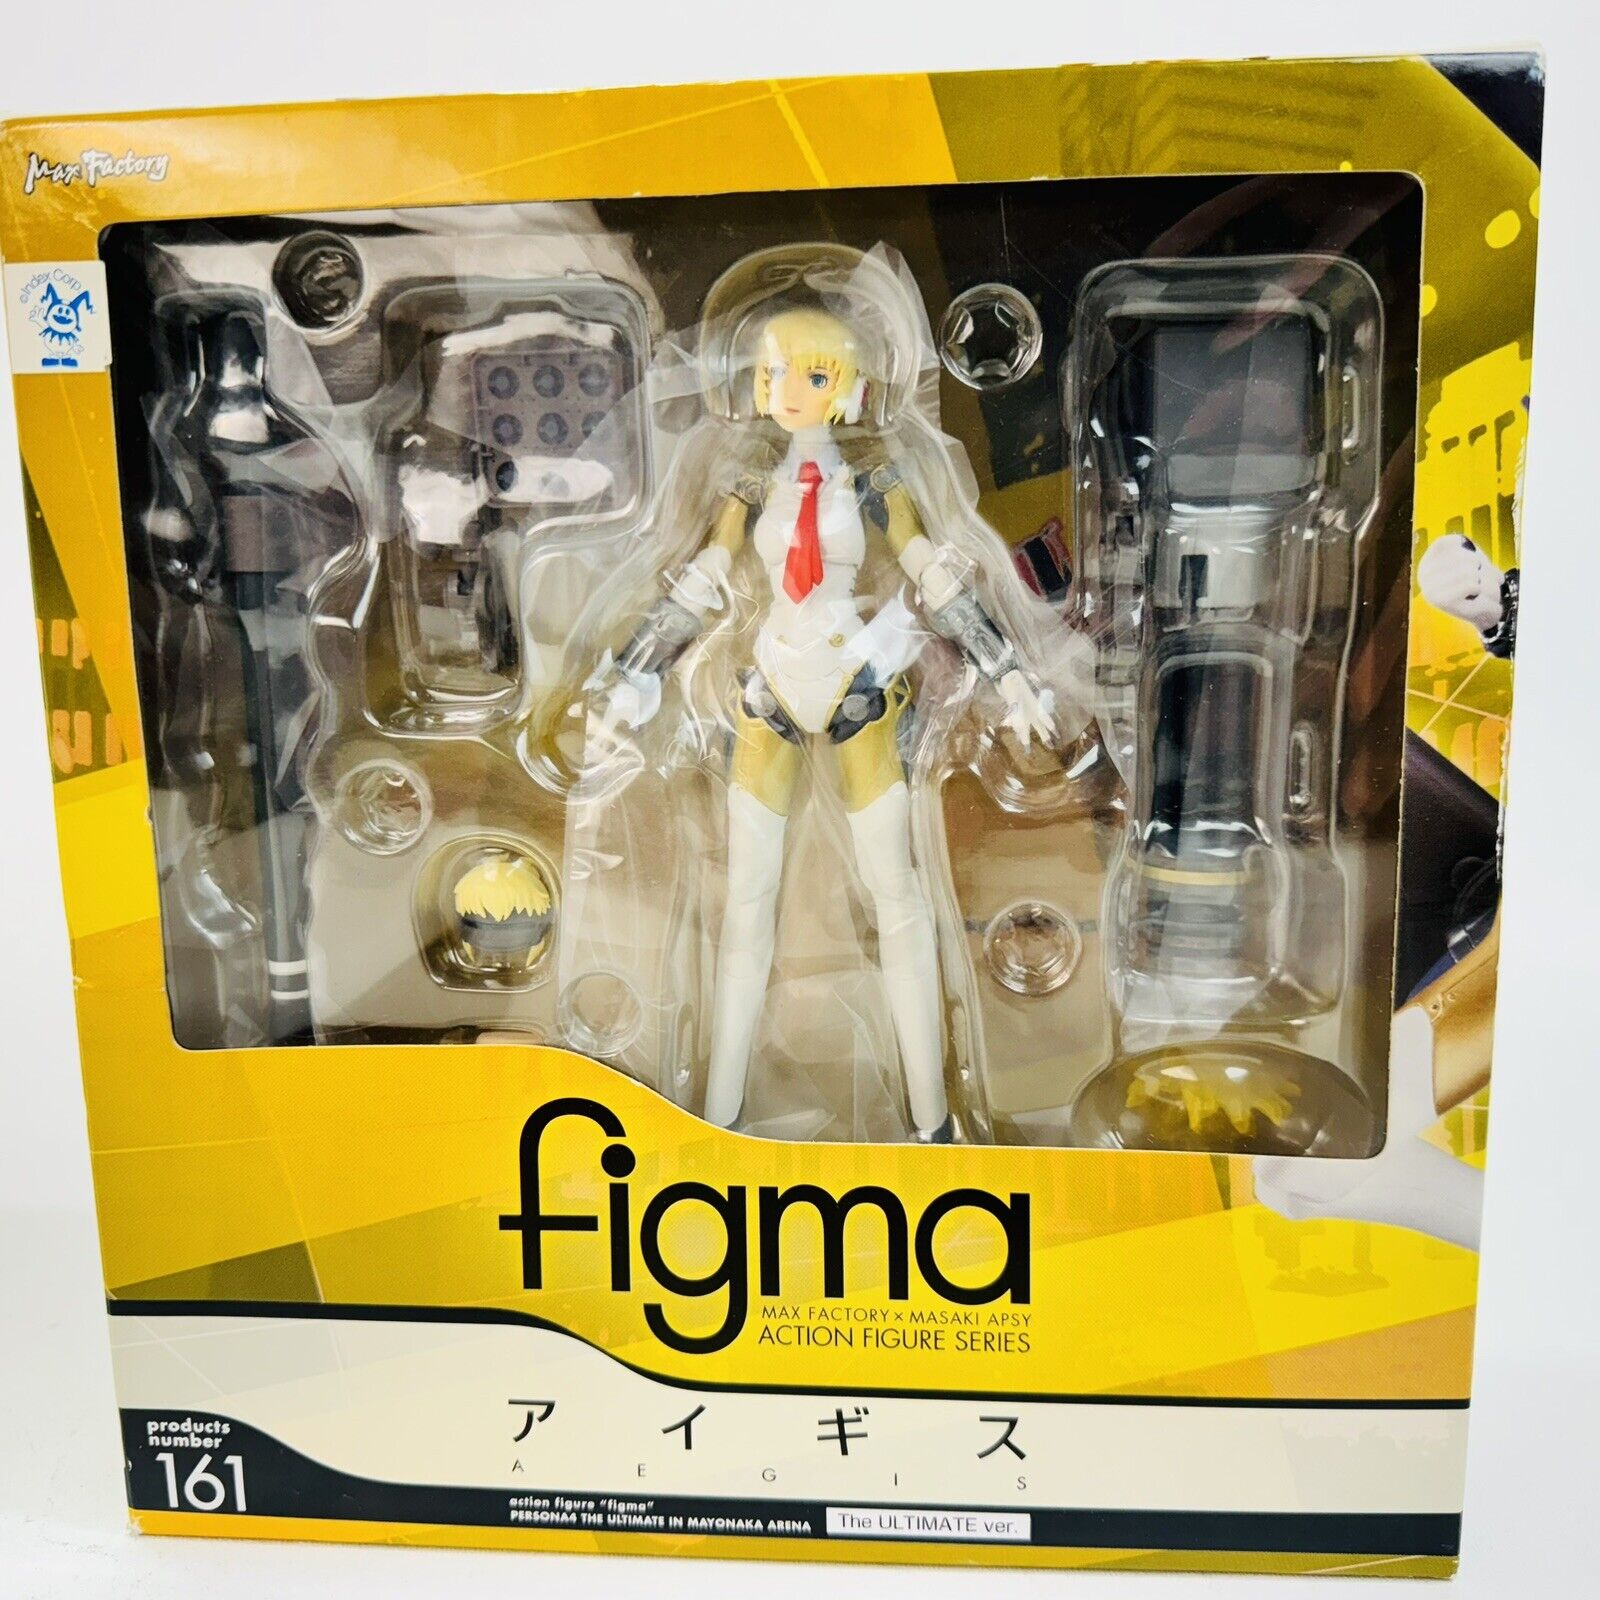 Persona 4 Aigis Figma Action Figure The Ultimate Arena Max Factory